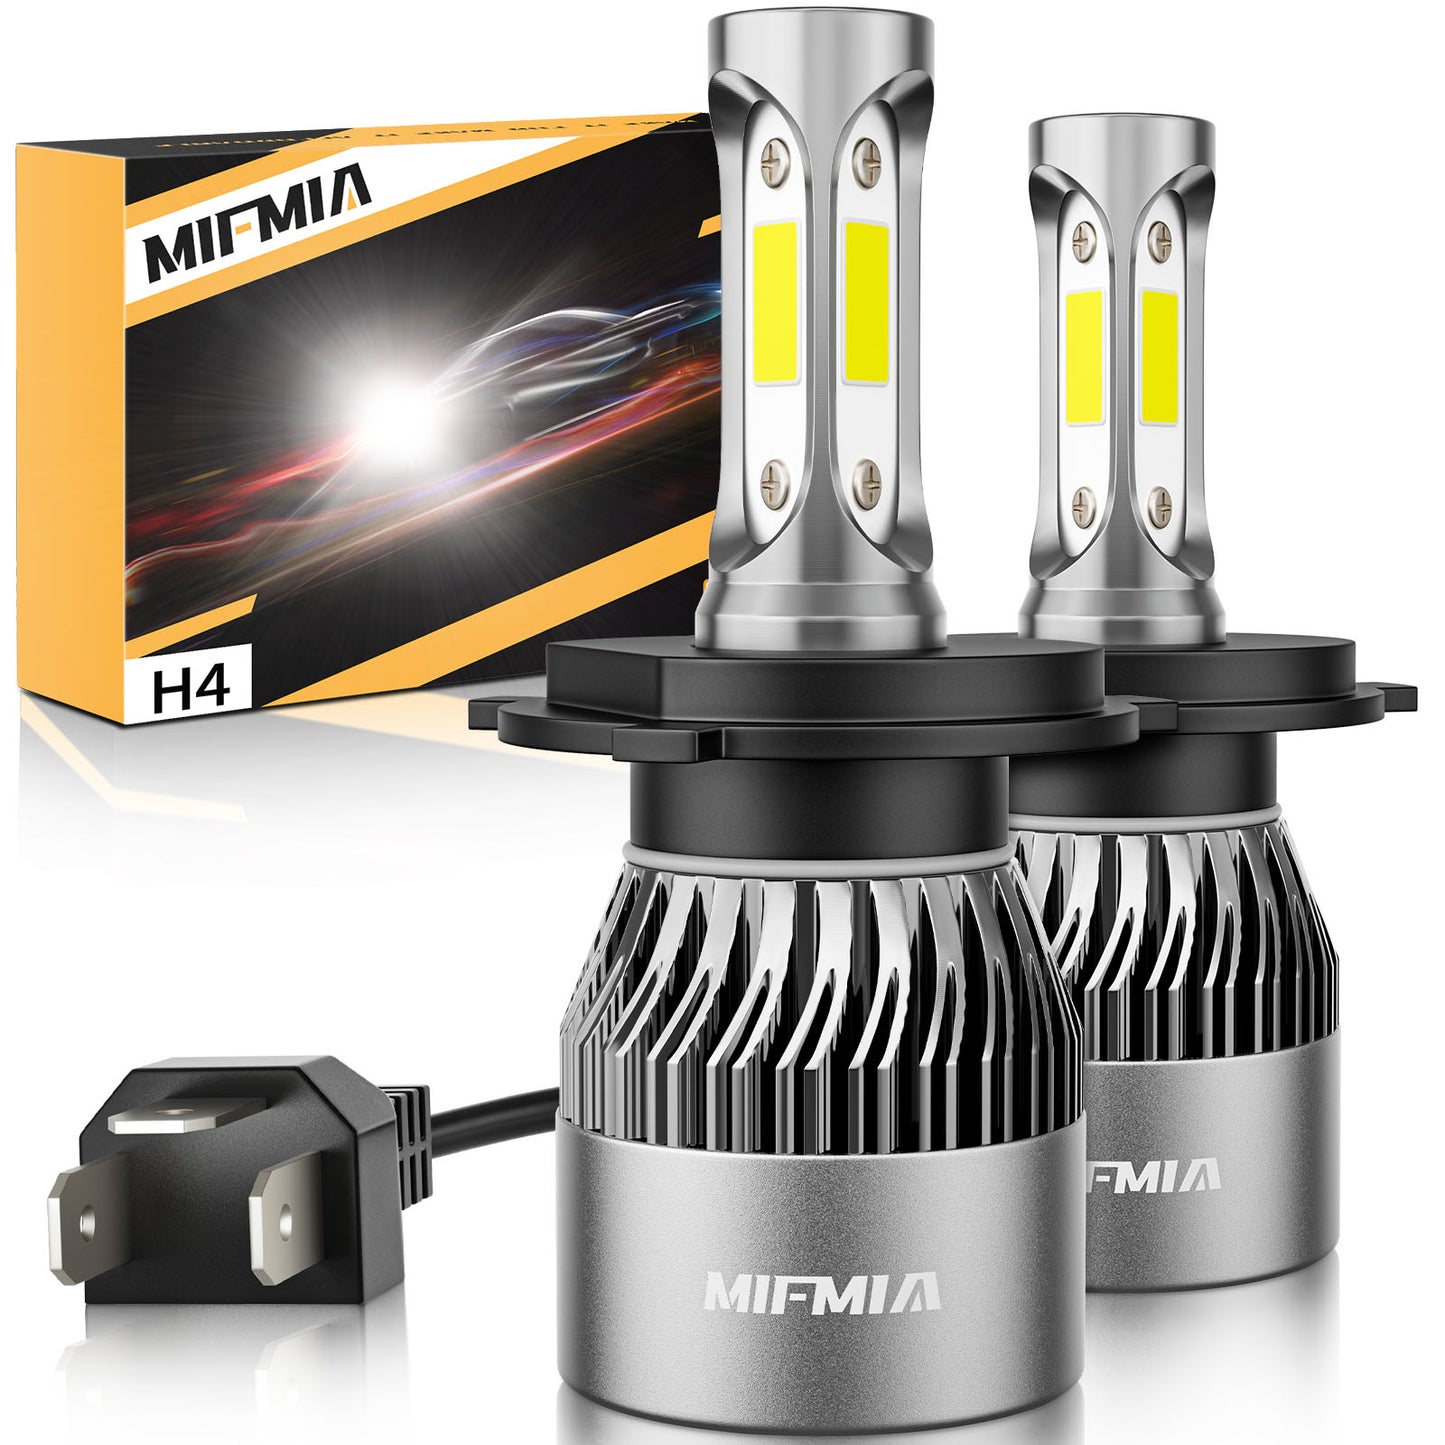 And now, the first road-legal H4-LED headlight bulb for retrofitting  halogen!